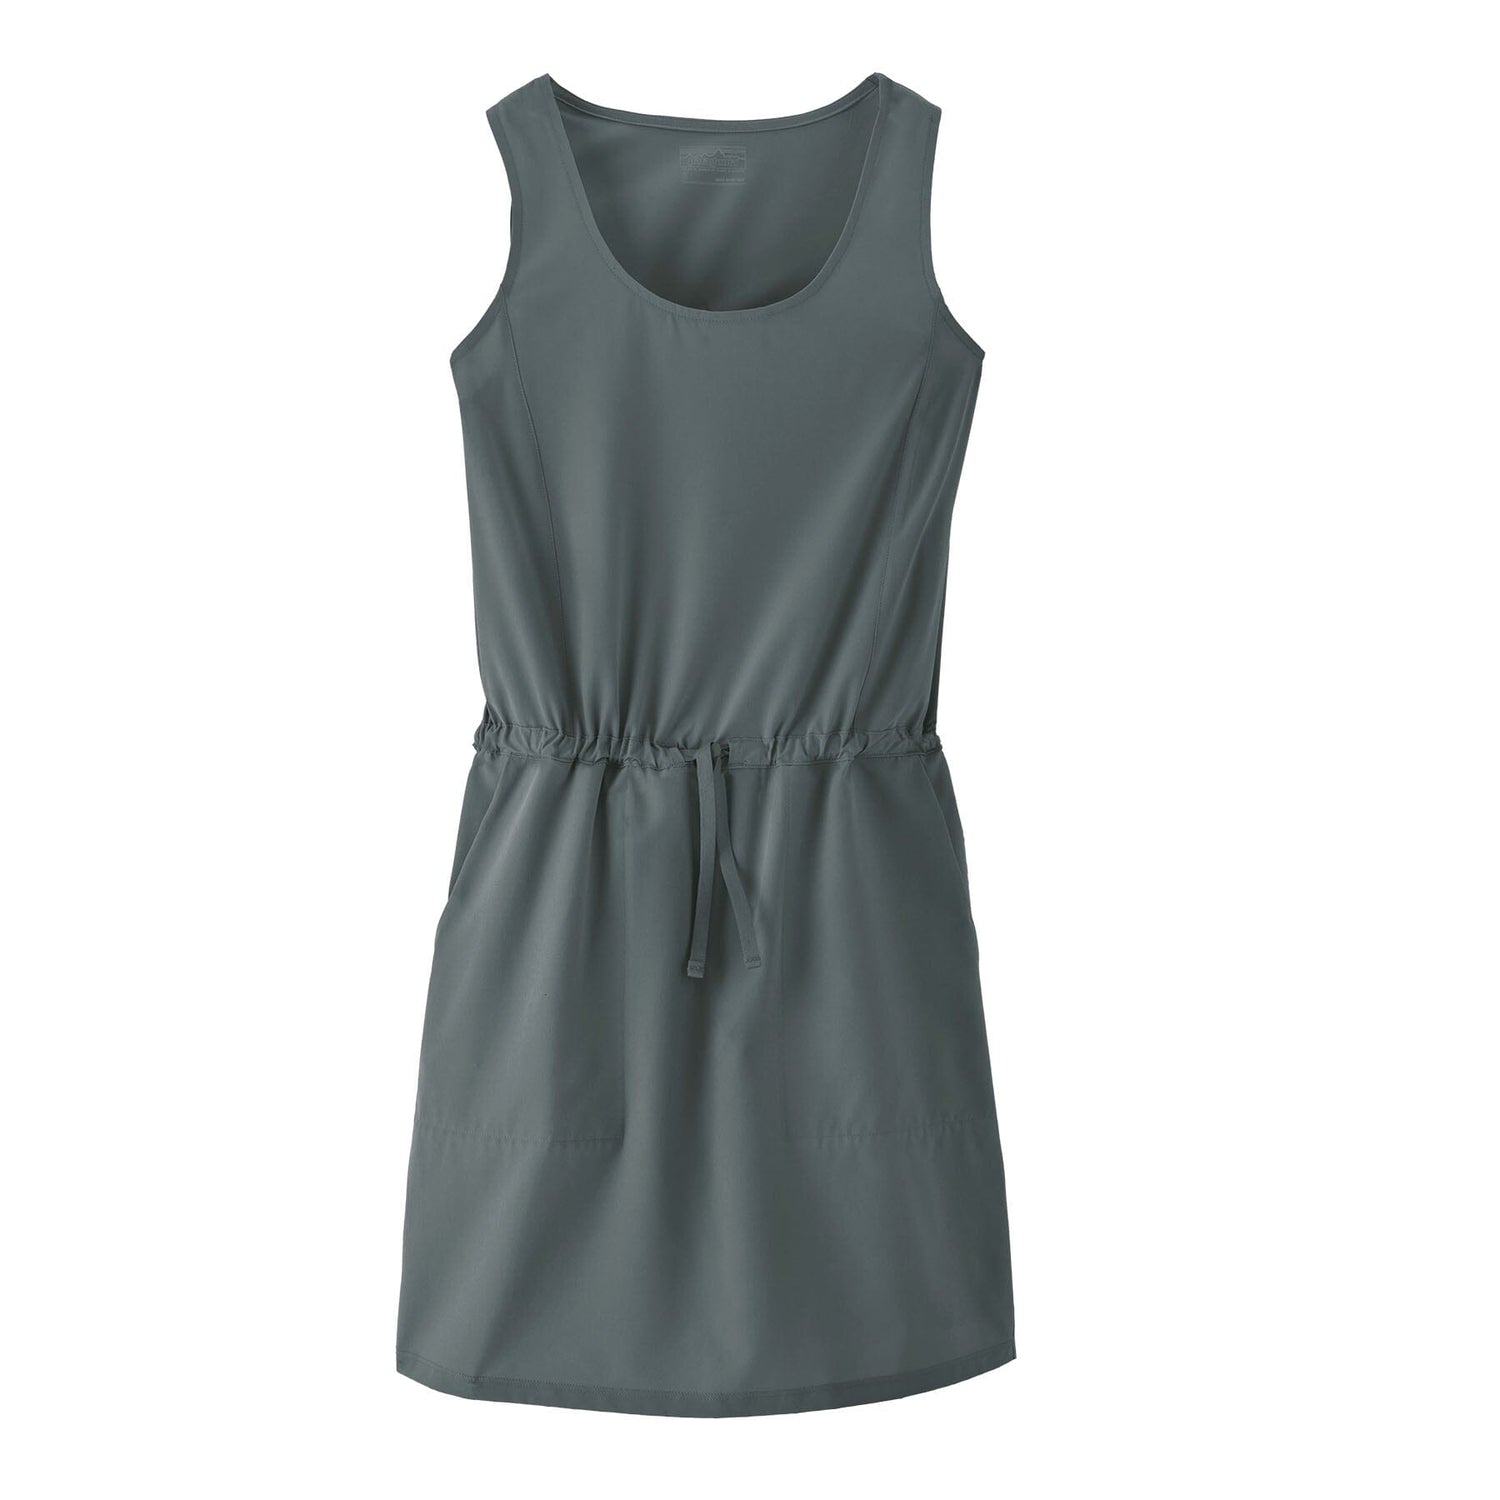 Patagonia - W's Fleetwith Dress - Recycled polyester & spandex - Weekendbee - sustainable sportswear